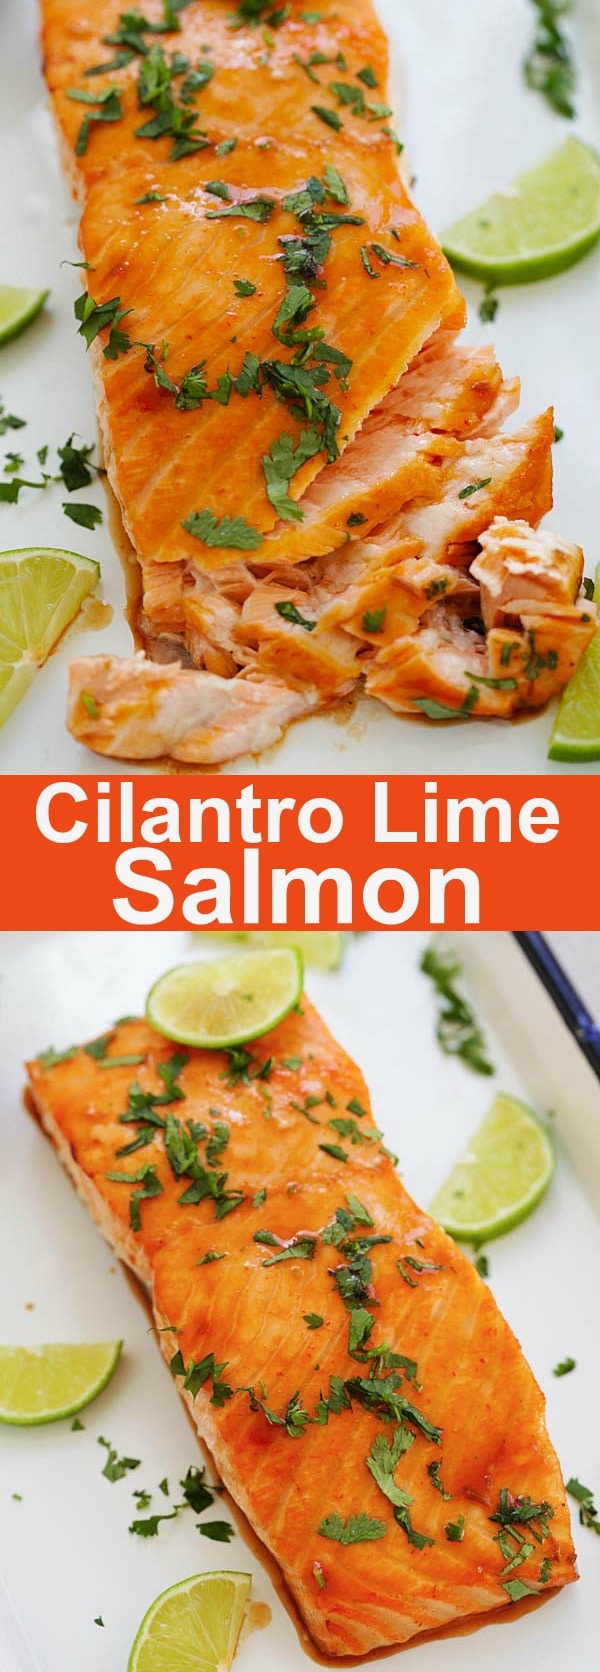 Cilantro Lime Salmon - the best and easiest cilantro lime salmon ever. 10 minutes active time and the rest in the oven. So good | rasamalaysia.com